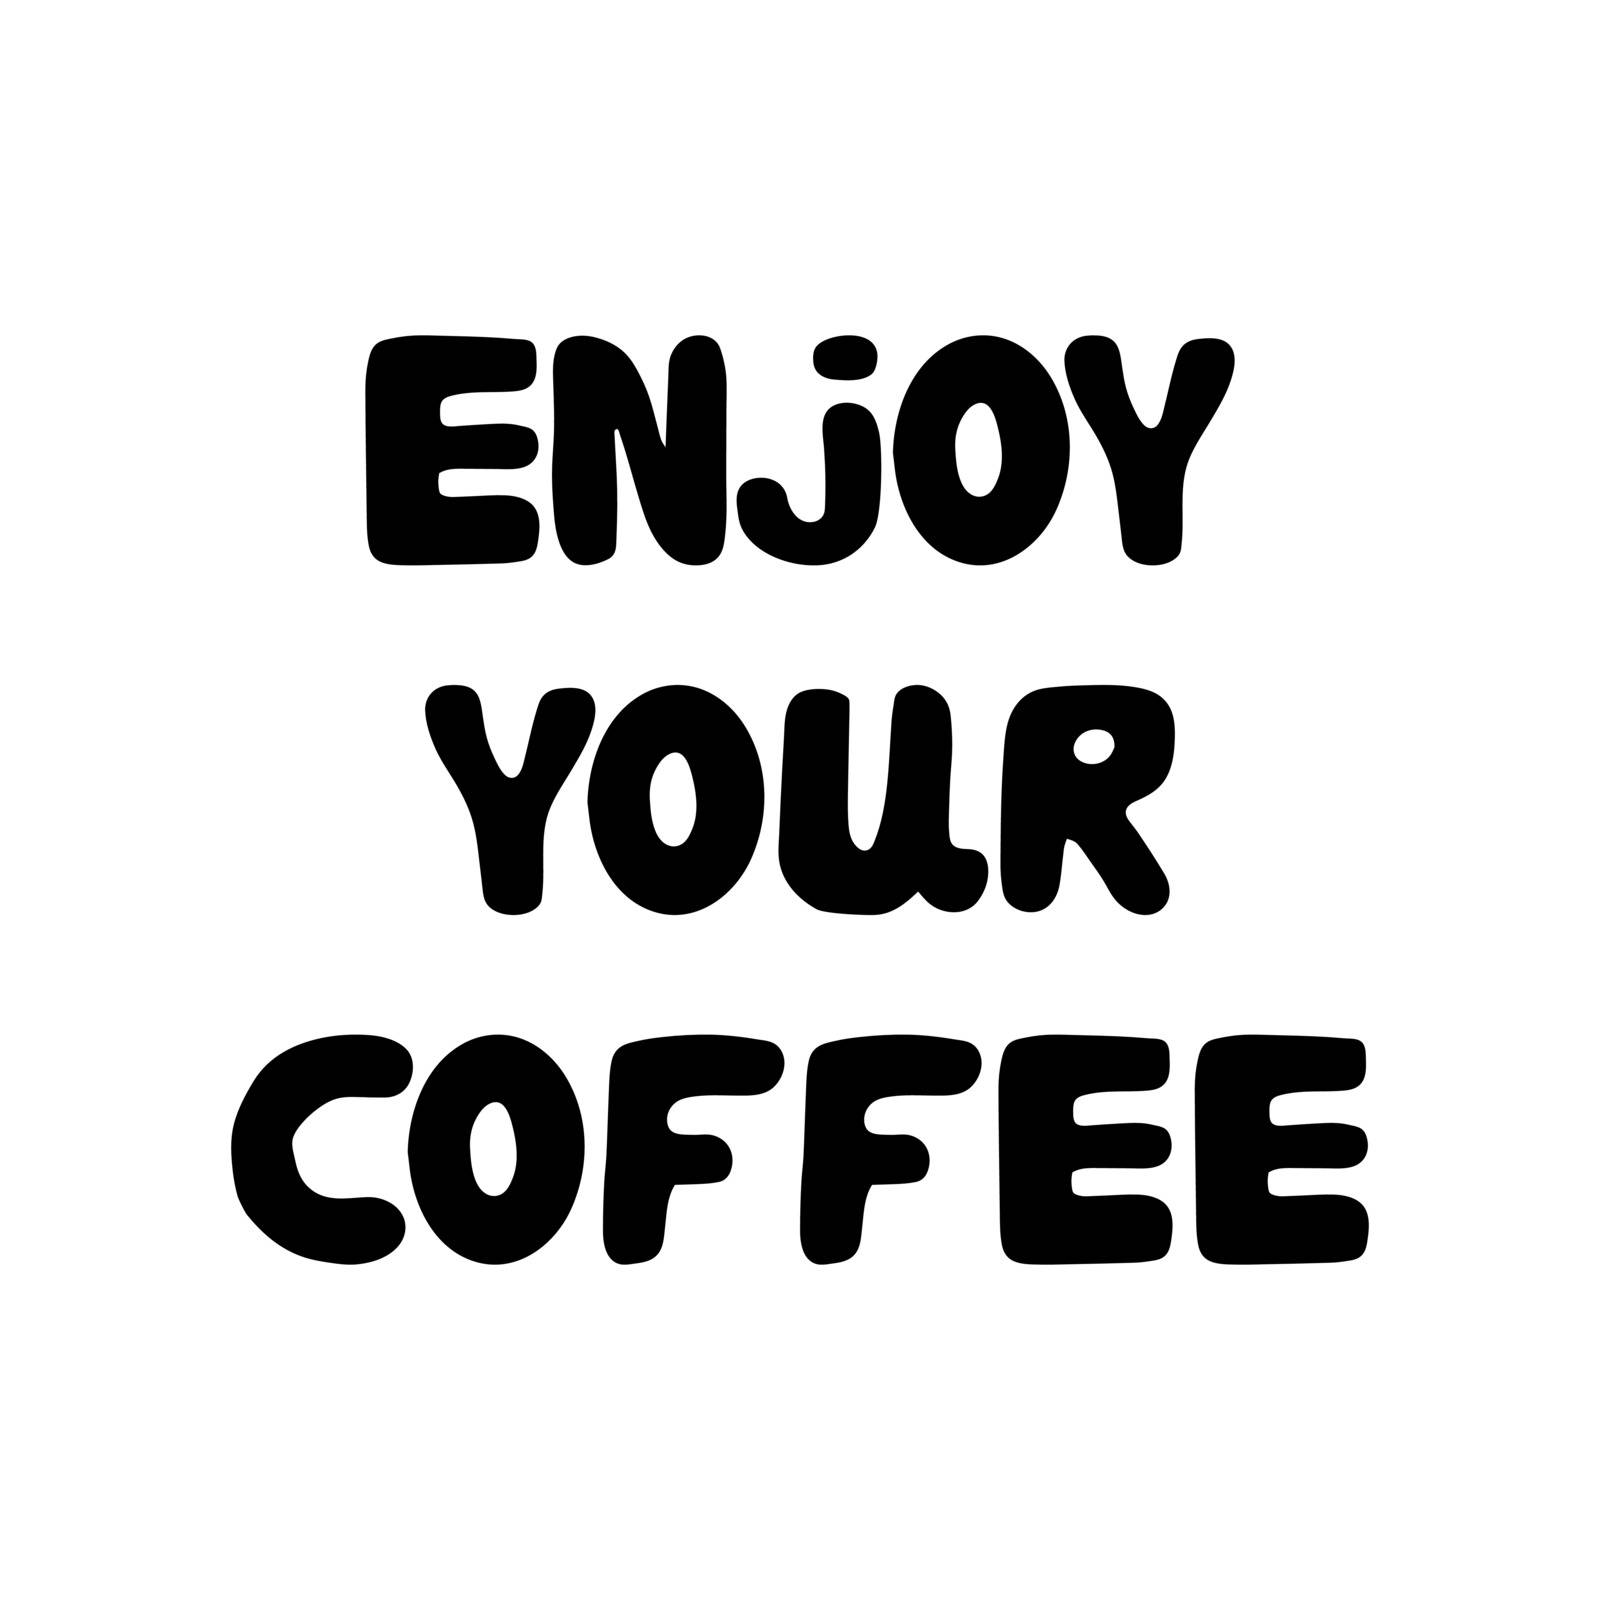 Enjoy your coffee. Cute hand drawn bauble lettering. Isolated on white background. Stock illustration.